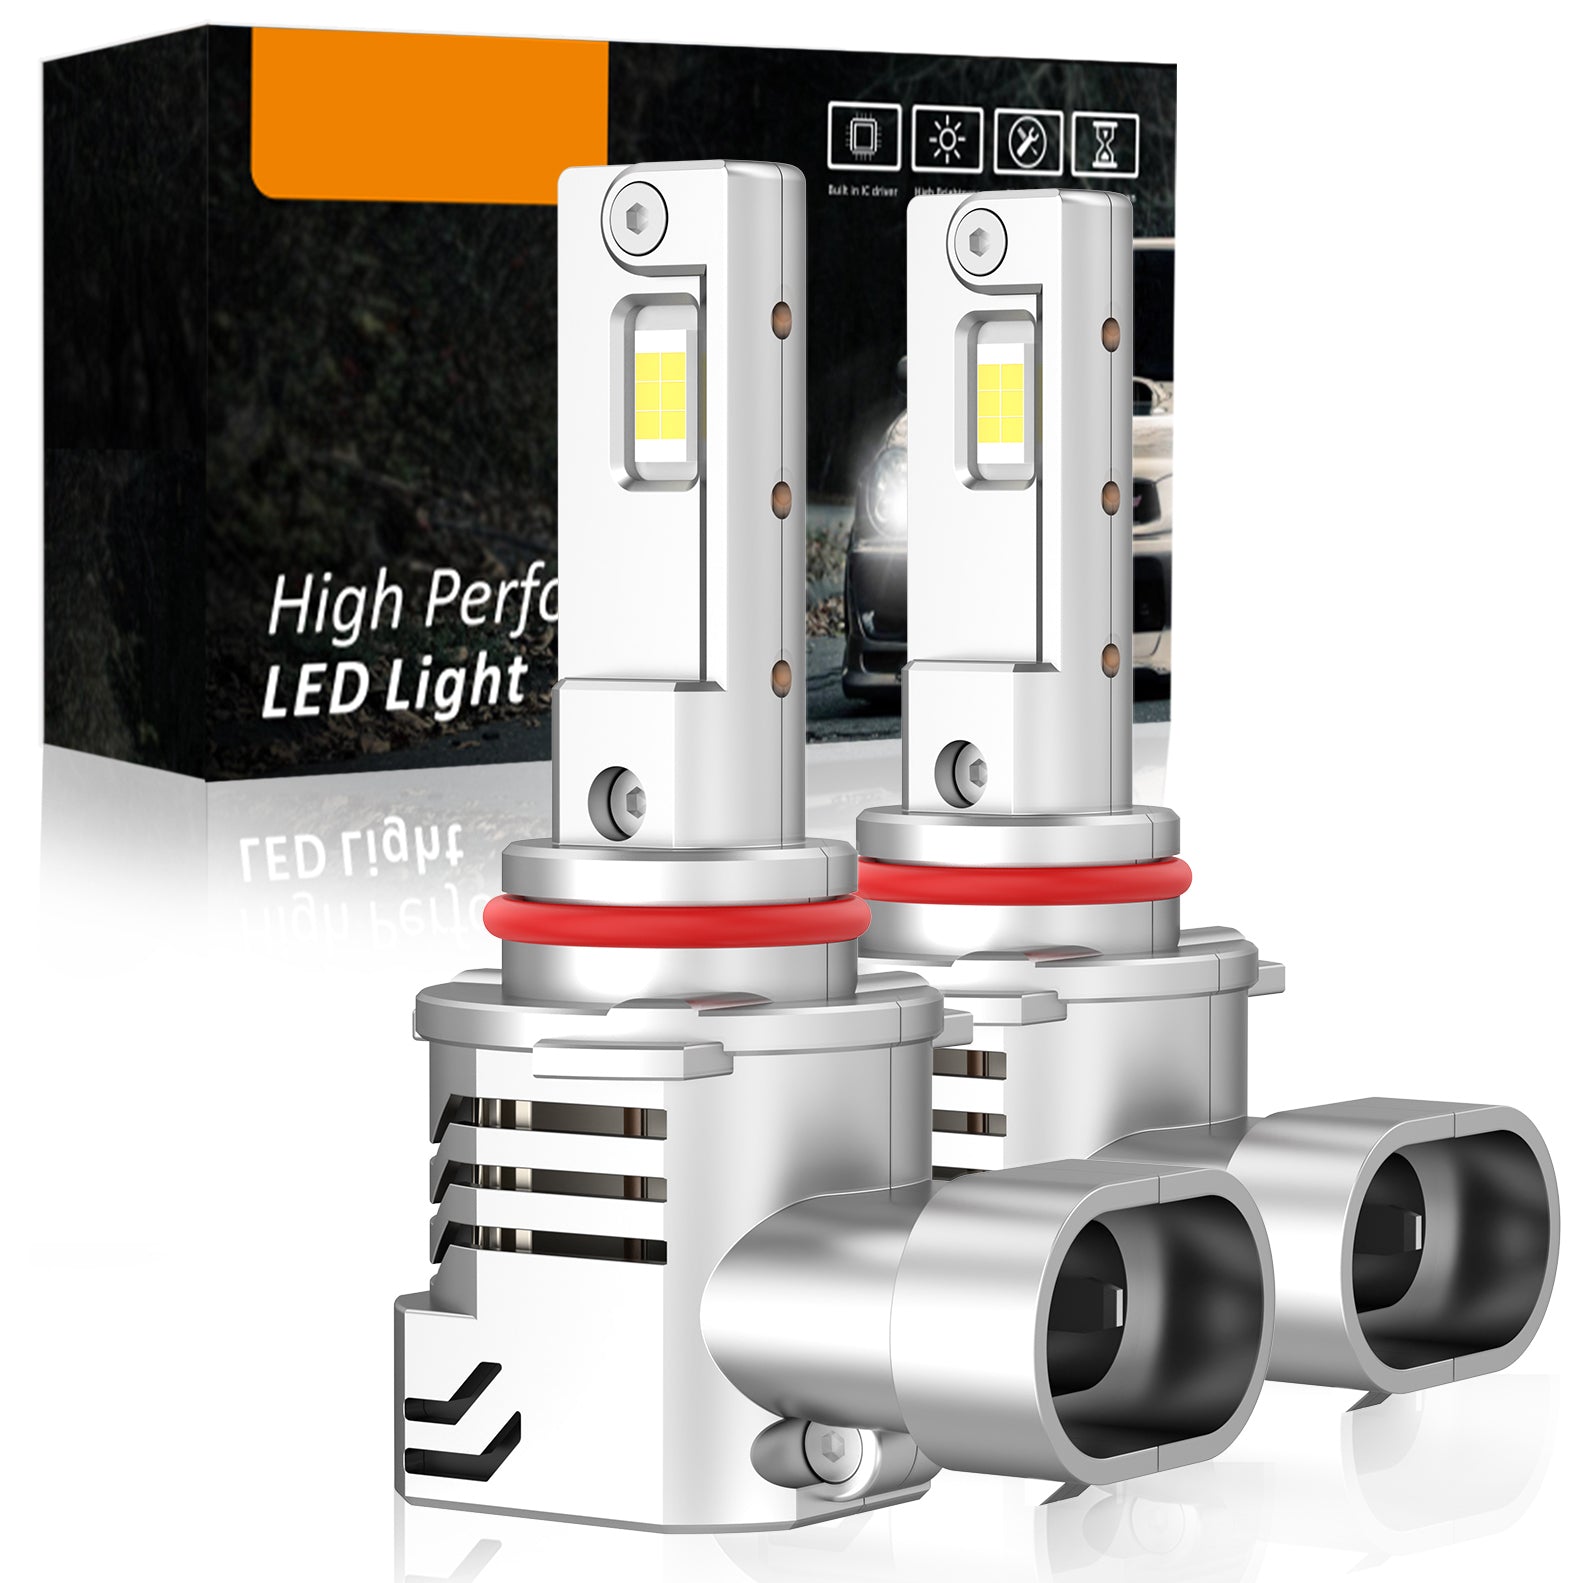 Kit Full Led Compatto HB3 HB4 12V 45W 8000 Lumen Canbus All In One IP65 Dissipazione a Ventola